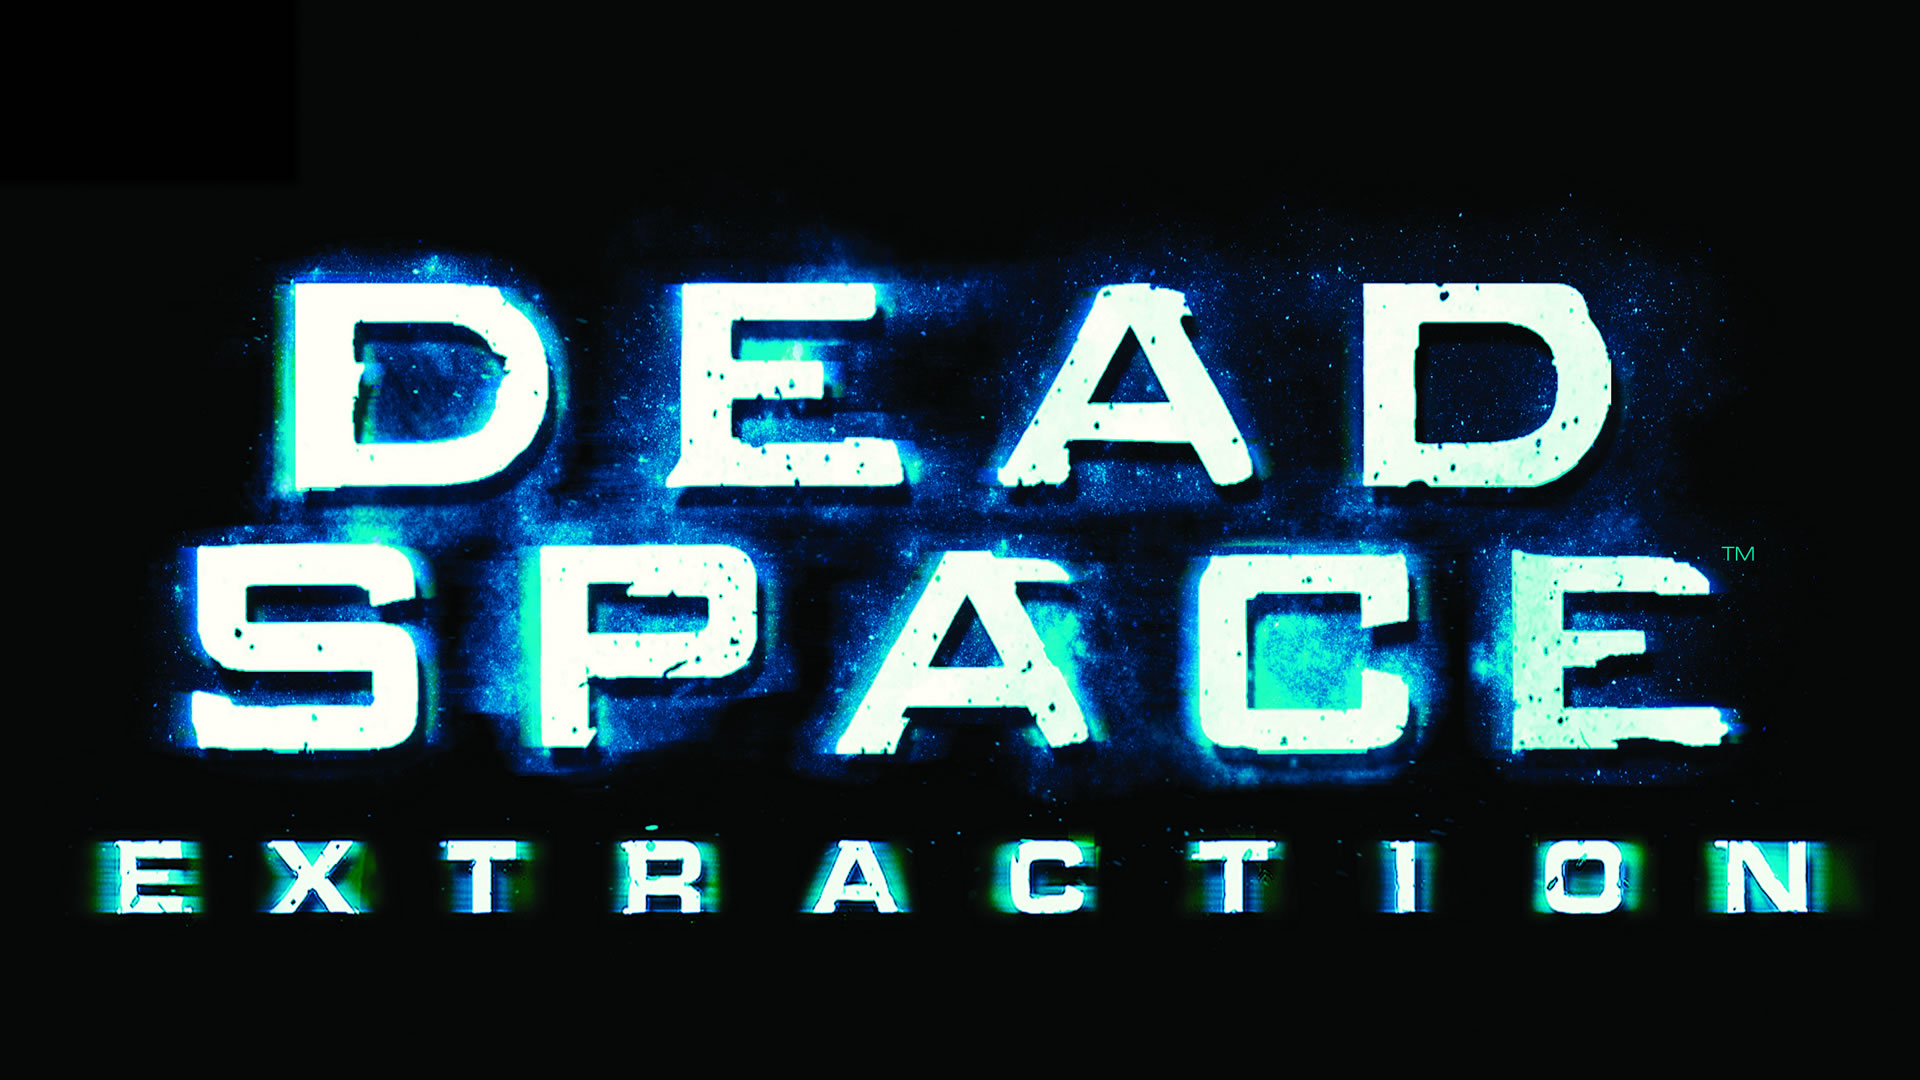 dead space extraction ost